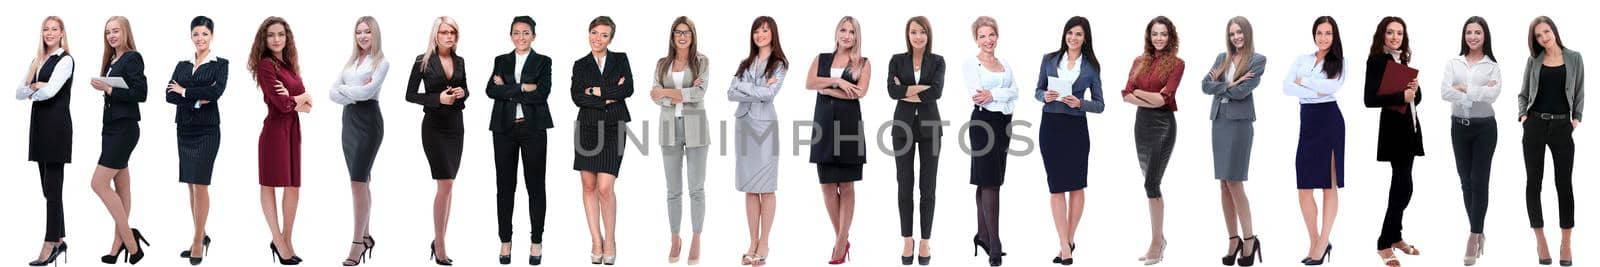 group of successful young businesswoman standing in a row by asdf